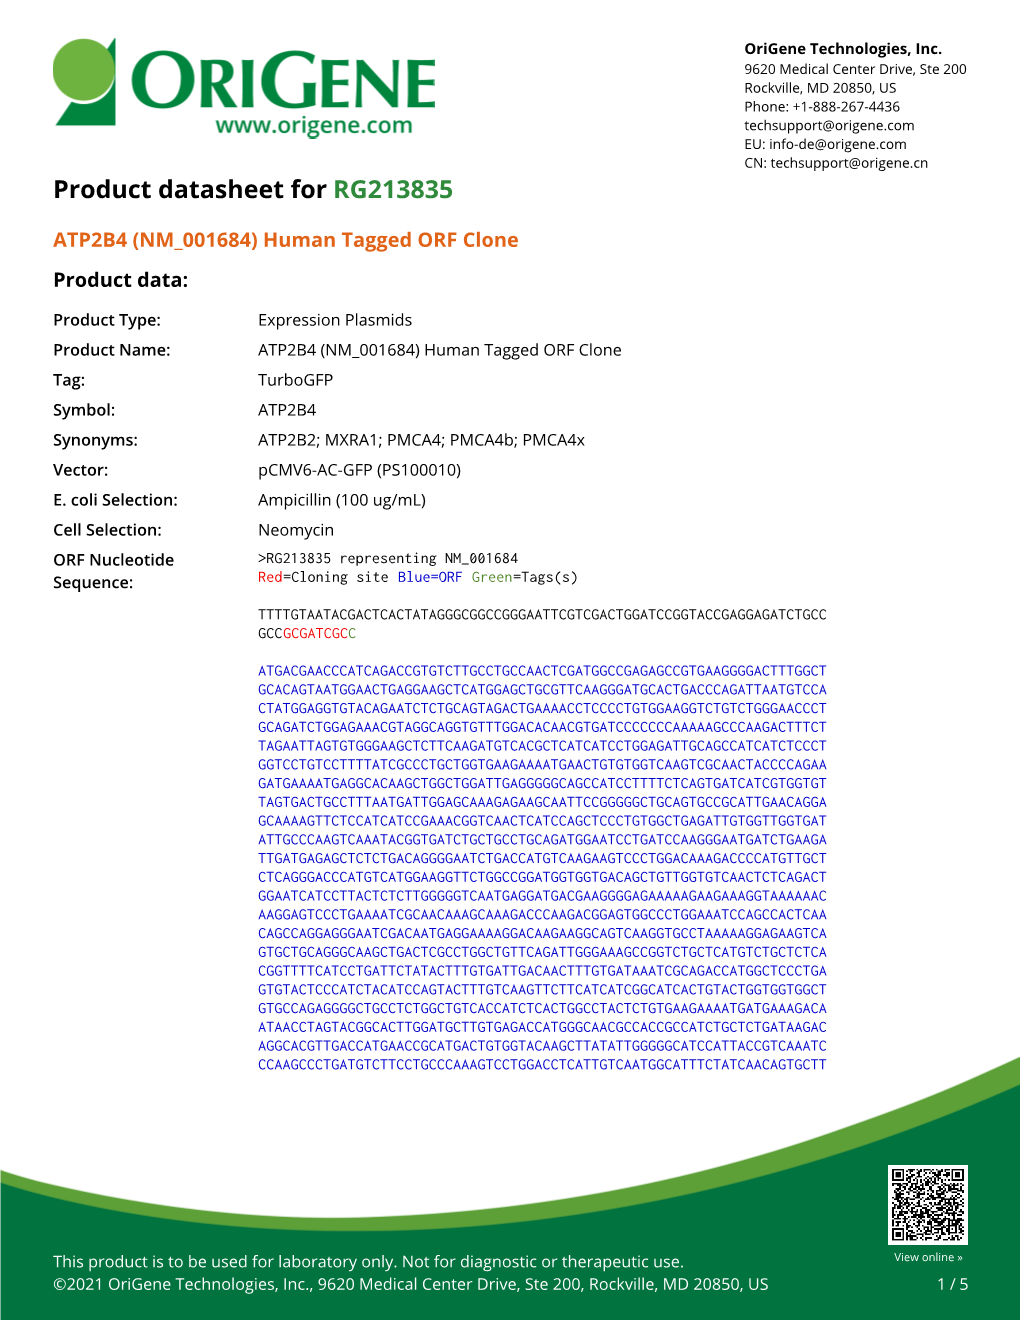 ATP2B4 (NM 001684) Human Tagged ORF Clone Product Data